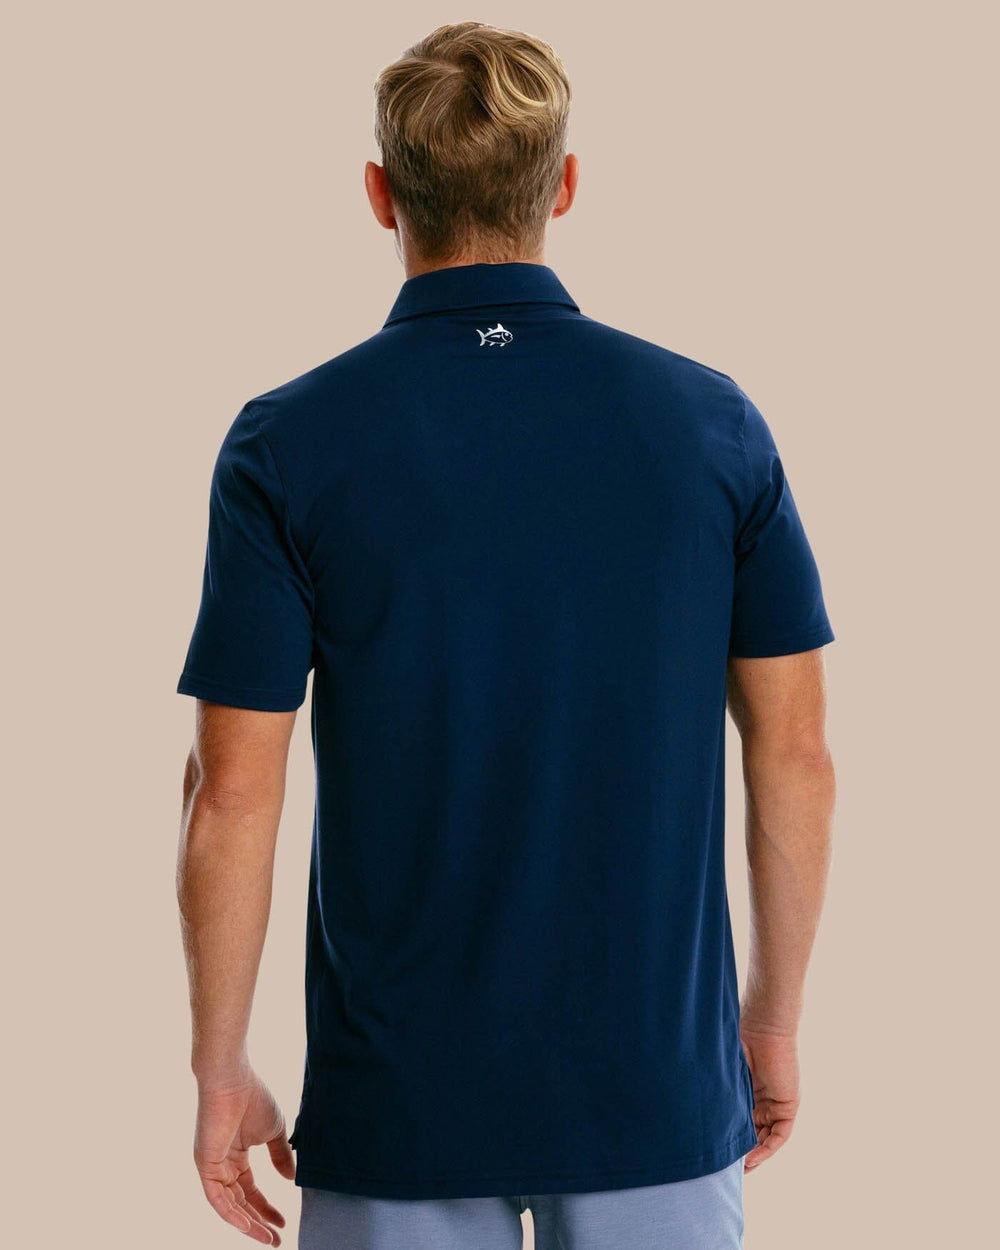 The back of the Men's Ryder Performance Polo Shirt by Southern Tide - True Navy